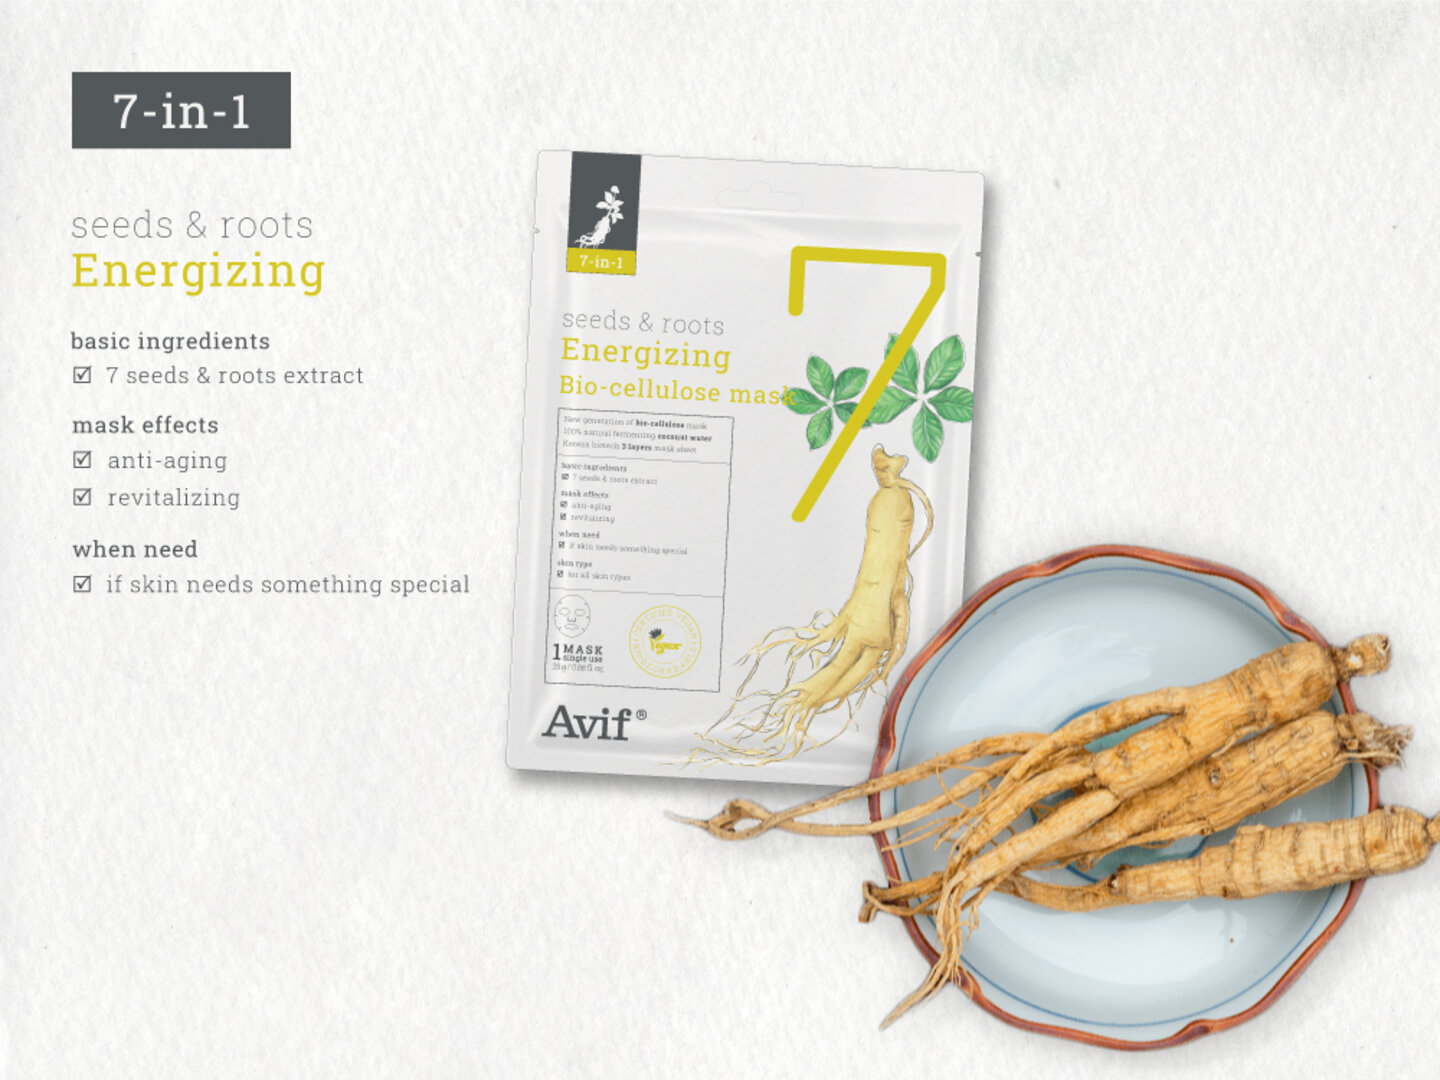 7-IN -1 SEEDS & ROOTS ENERGIZING BIO-CELLULOSE MASK